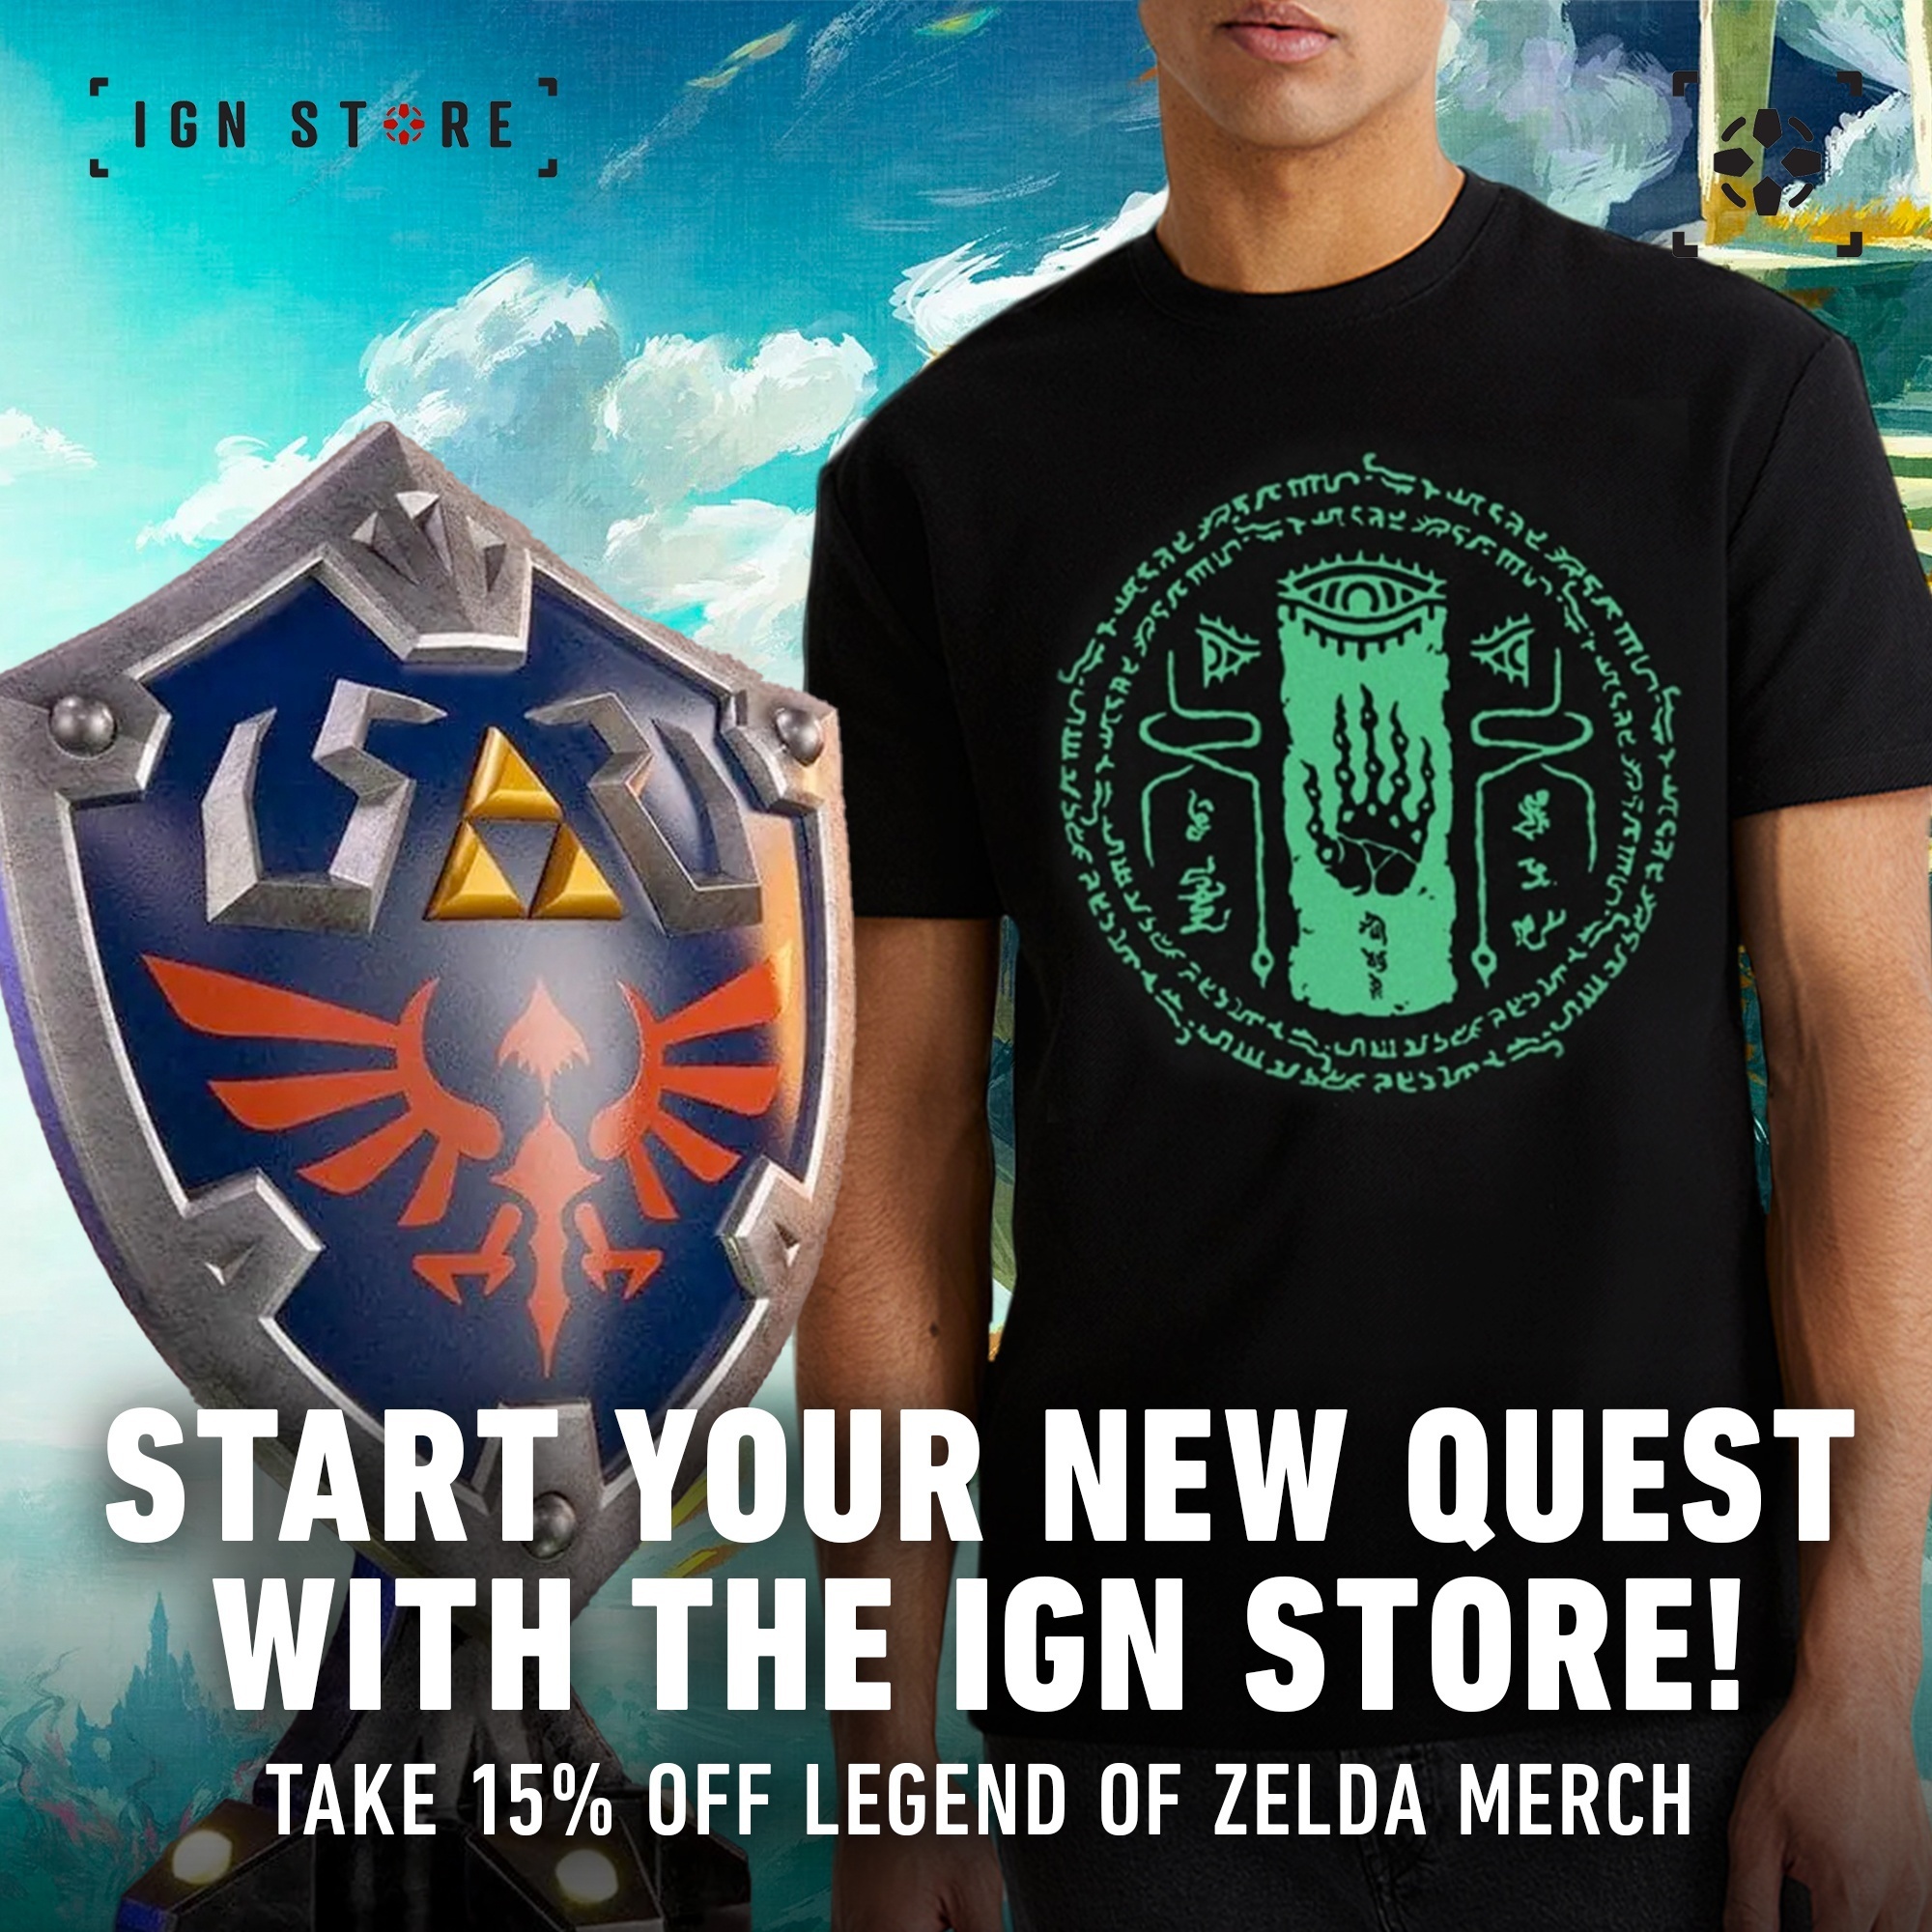 IGN Store on X: The Legend of Zelda: Tears of the Kingdom is finally here!  To celebrate, we have all Legend of Zelda merch on sale for 15% off. Get  yours now